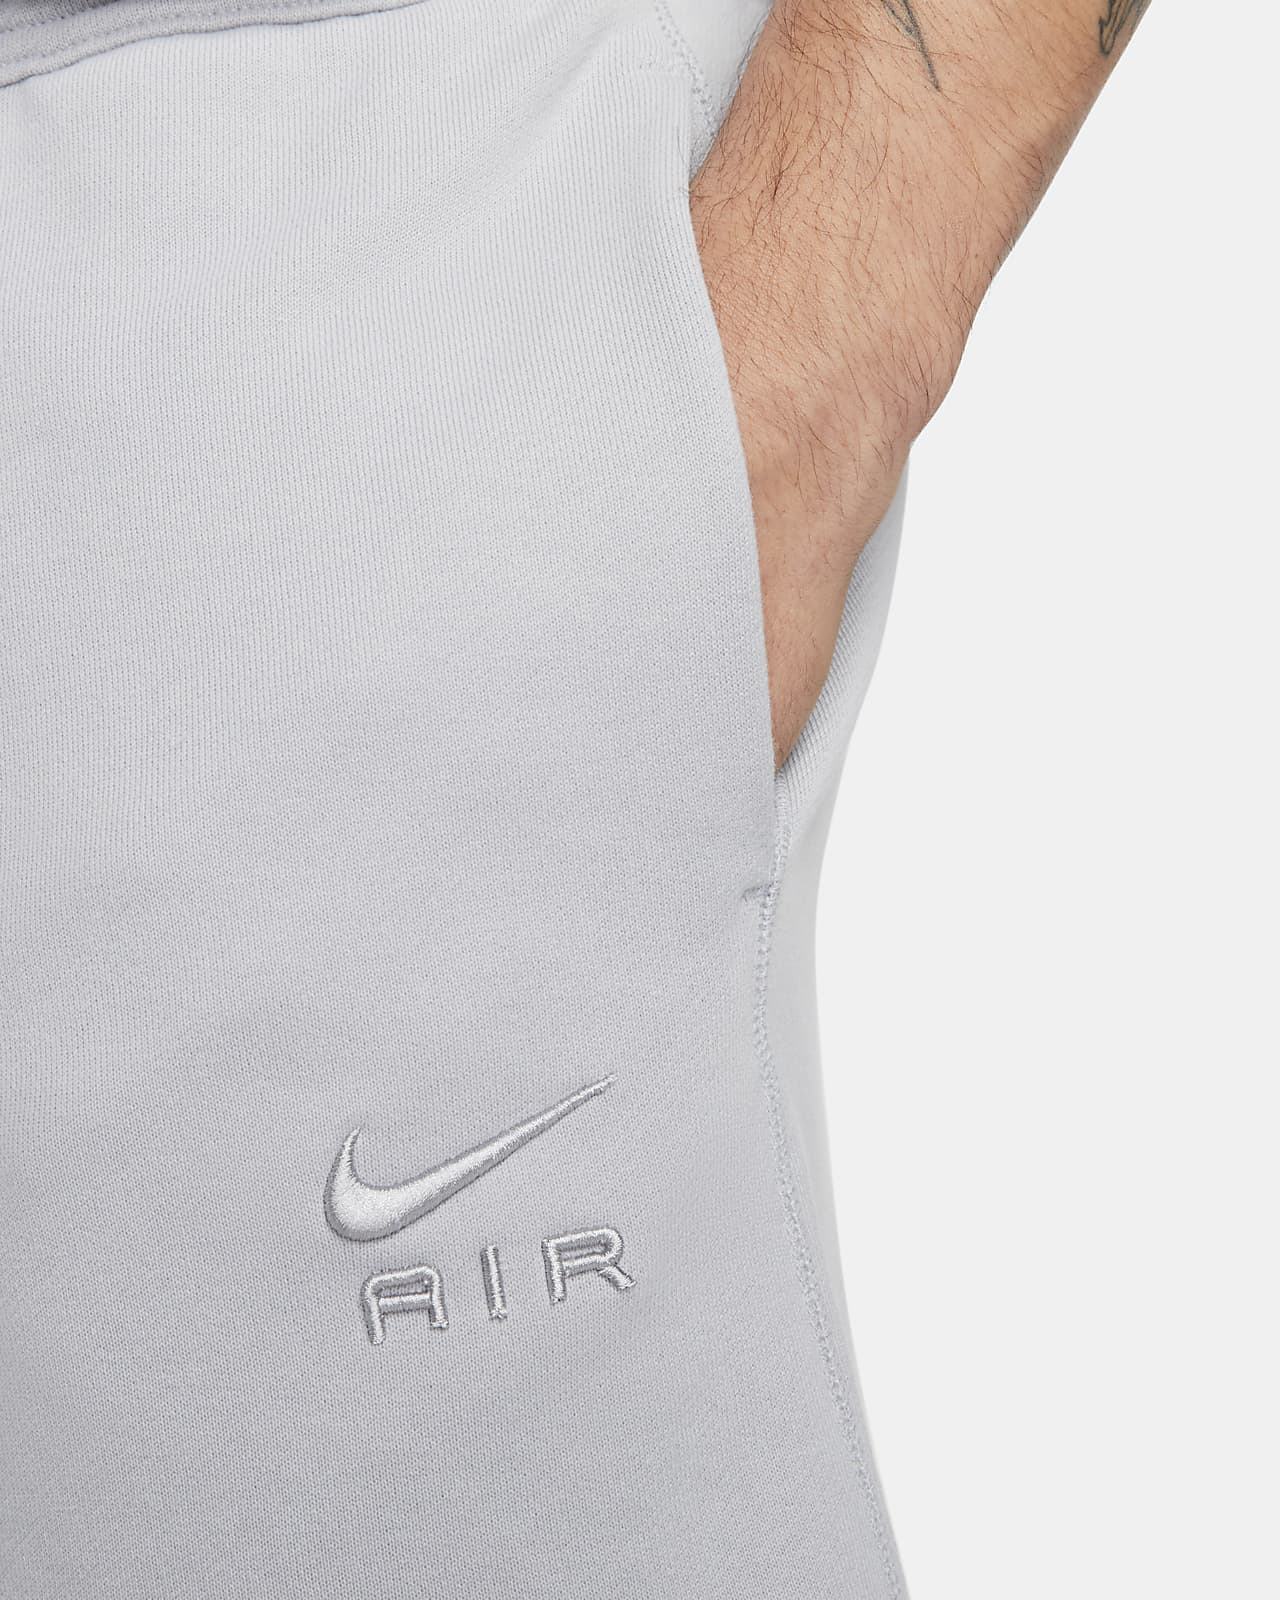 Nike Air Men's French Terry Shorts.